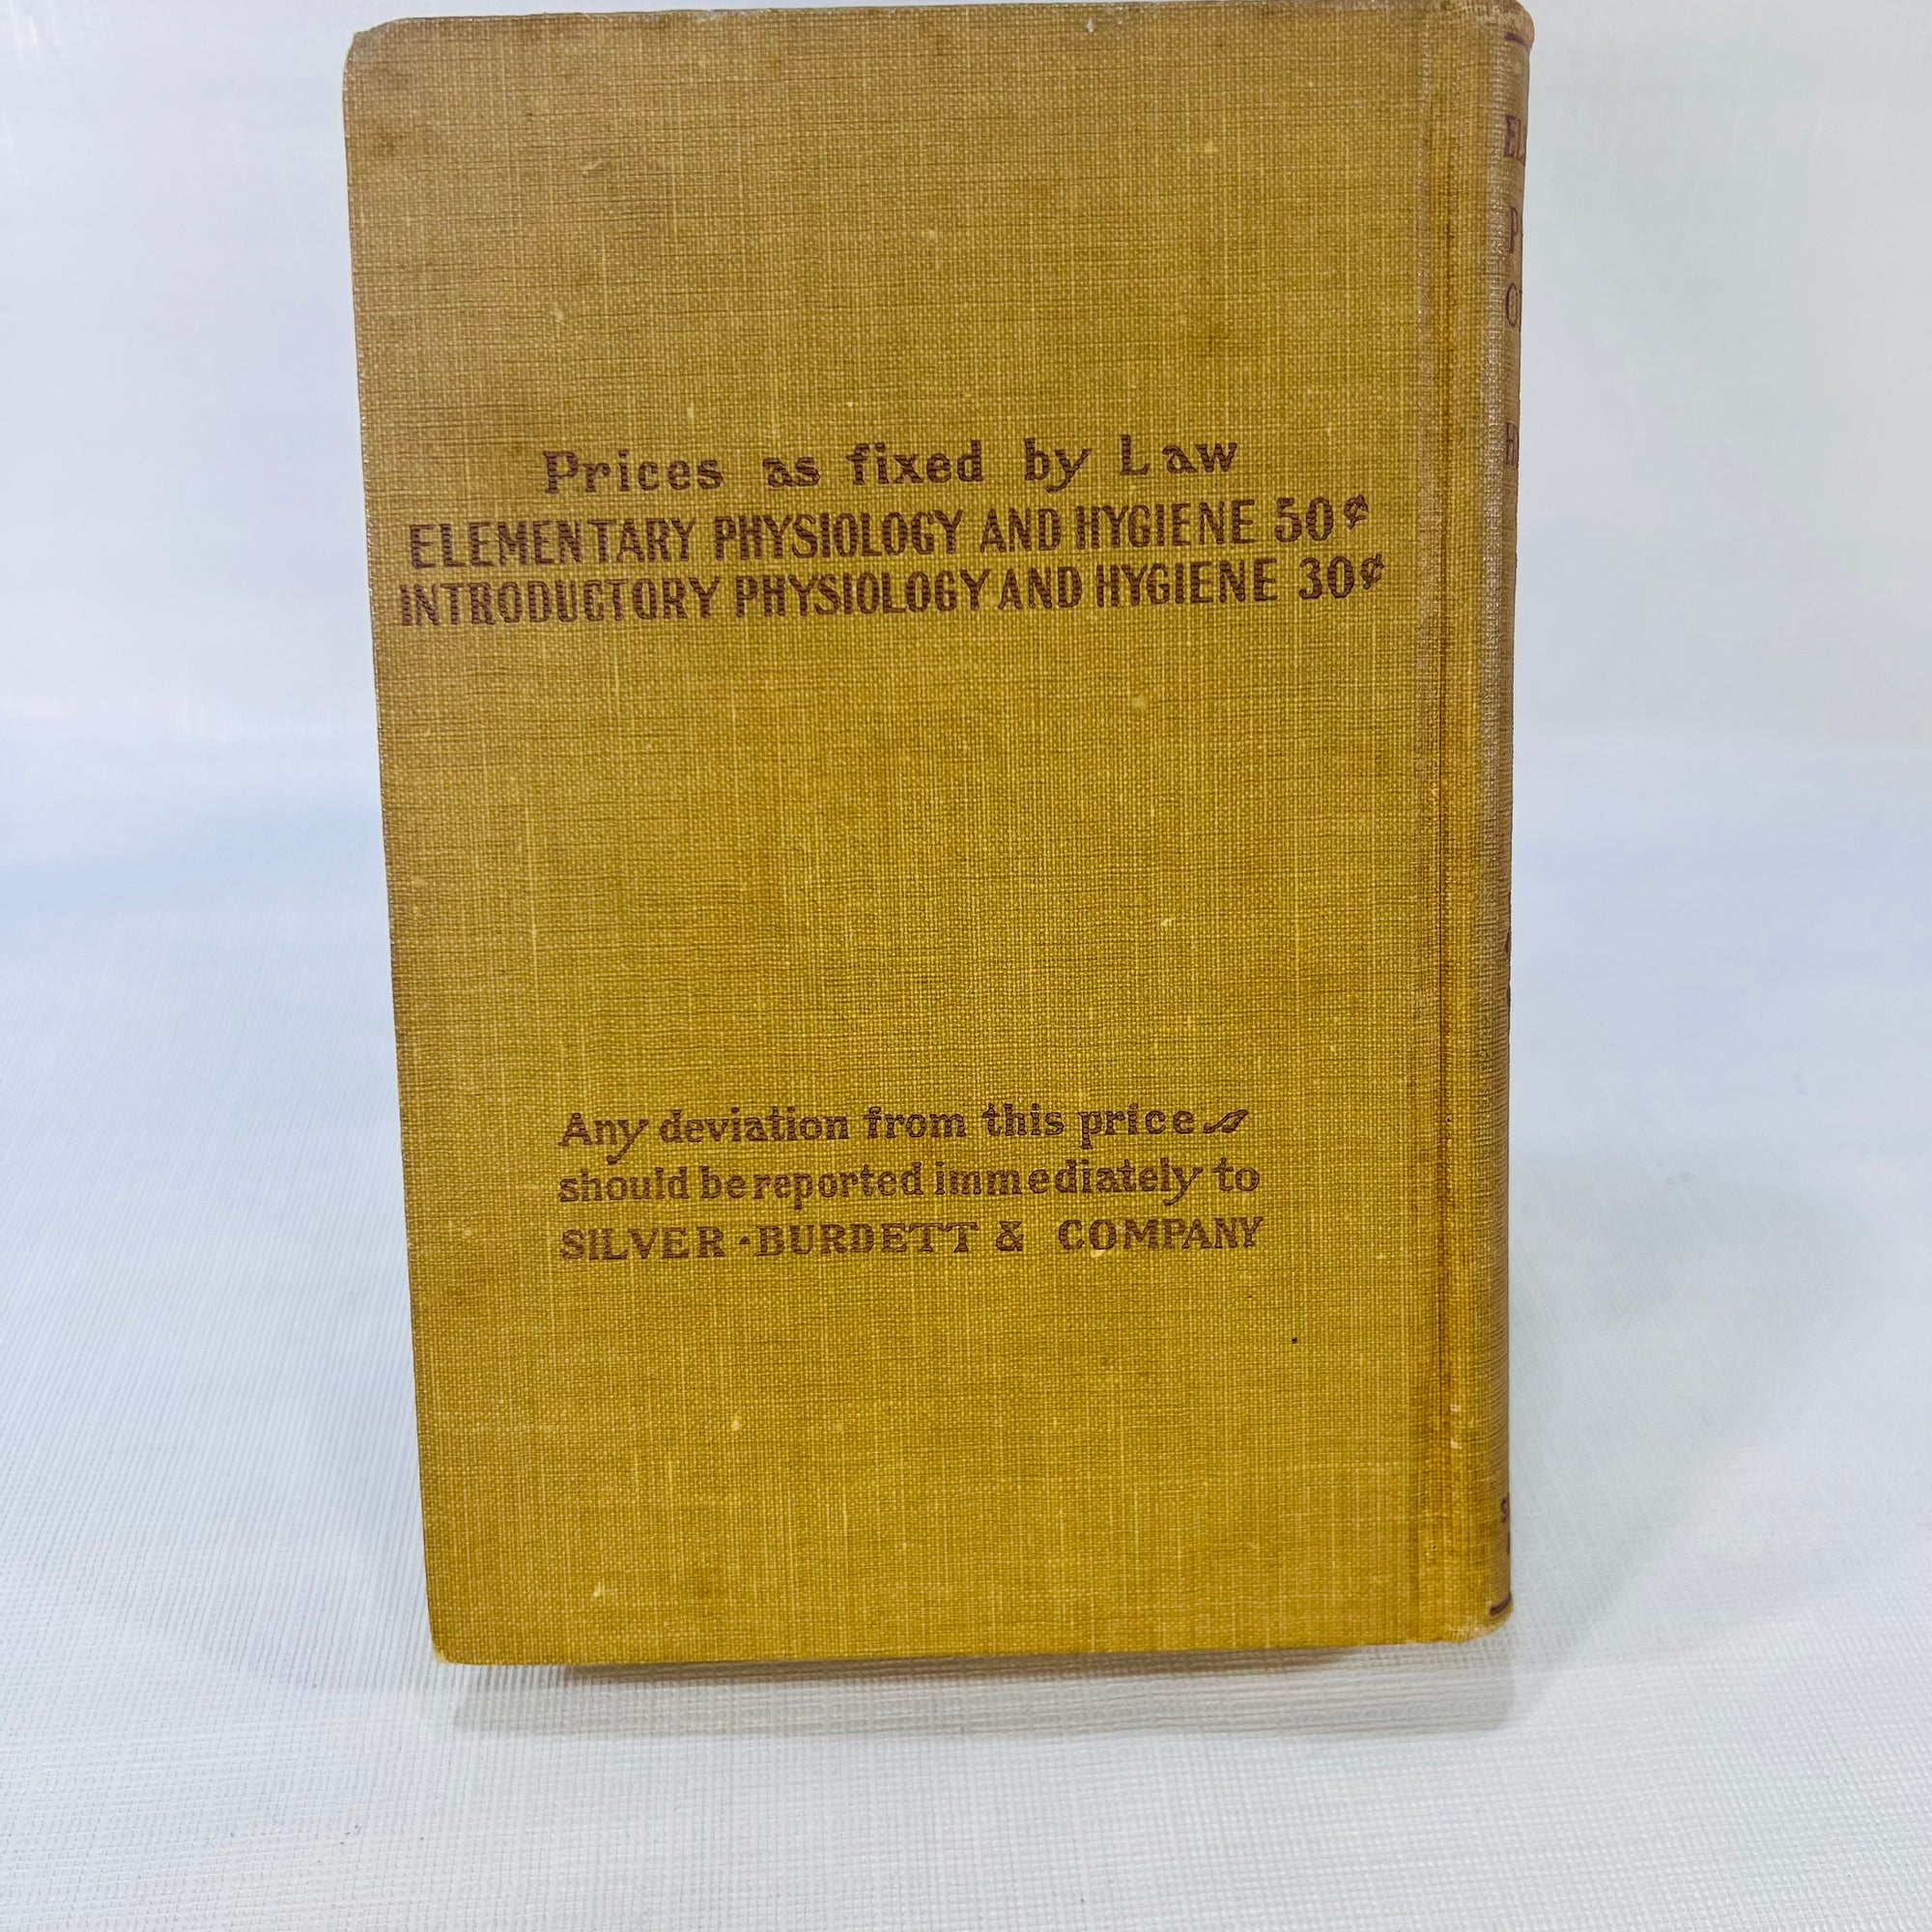 Elementary Physiology and Hygiene For Use in Schools by H.W. Conn 1906 Phd Silver, Burdett and Company